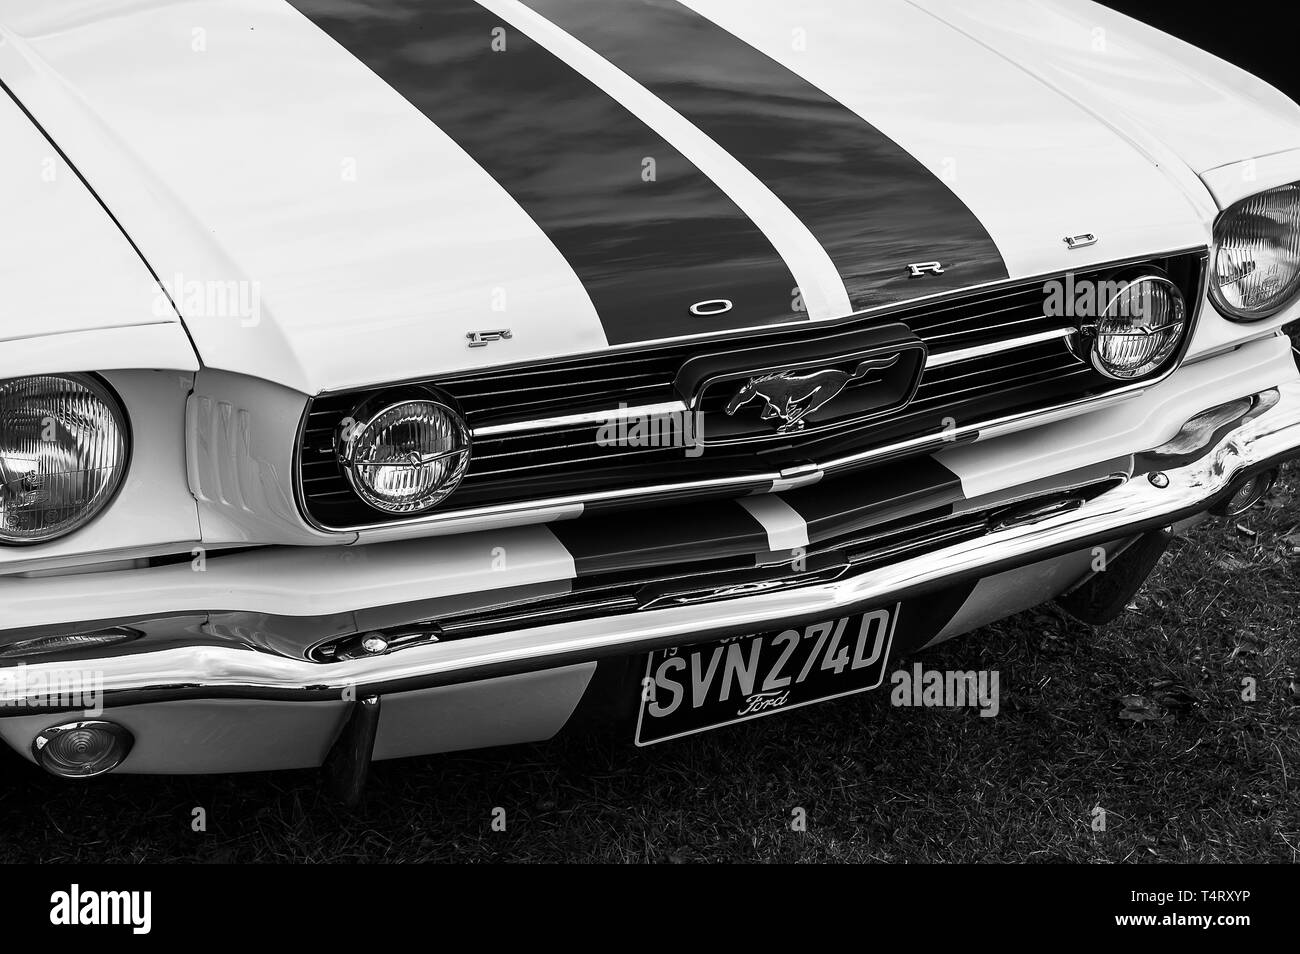 A 1966 Ford Mustang on display at a car show Stock Photo